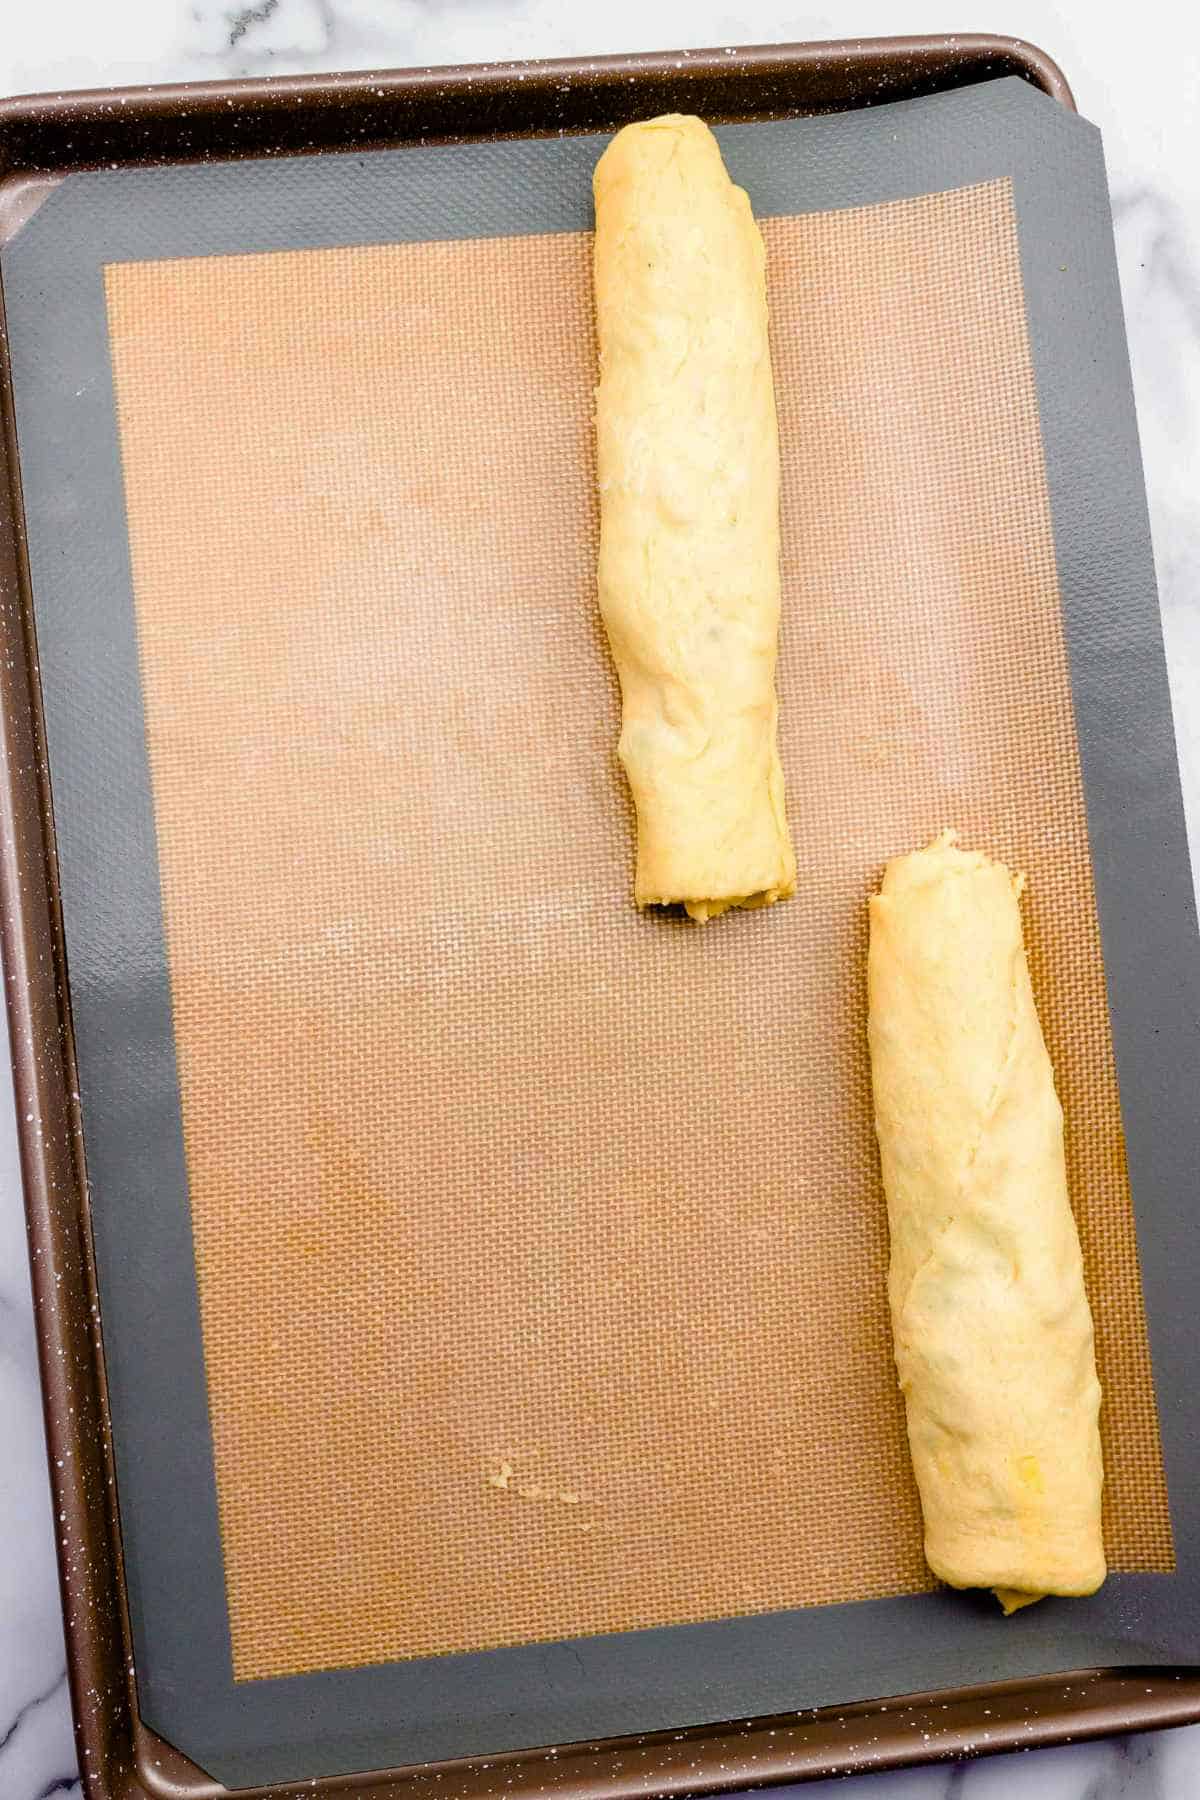 rolled up filling stuffed dough.